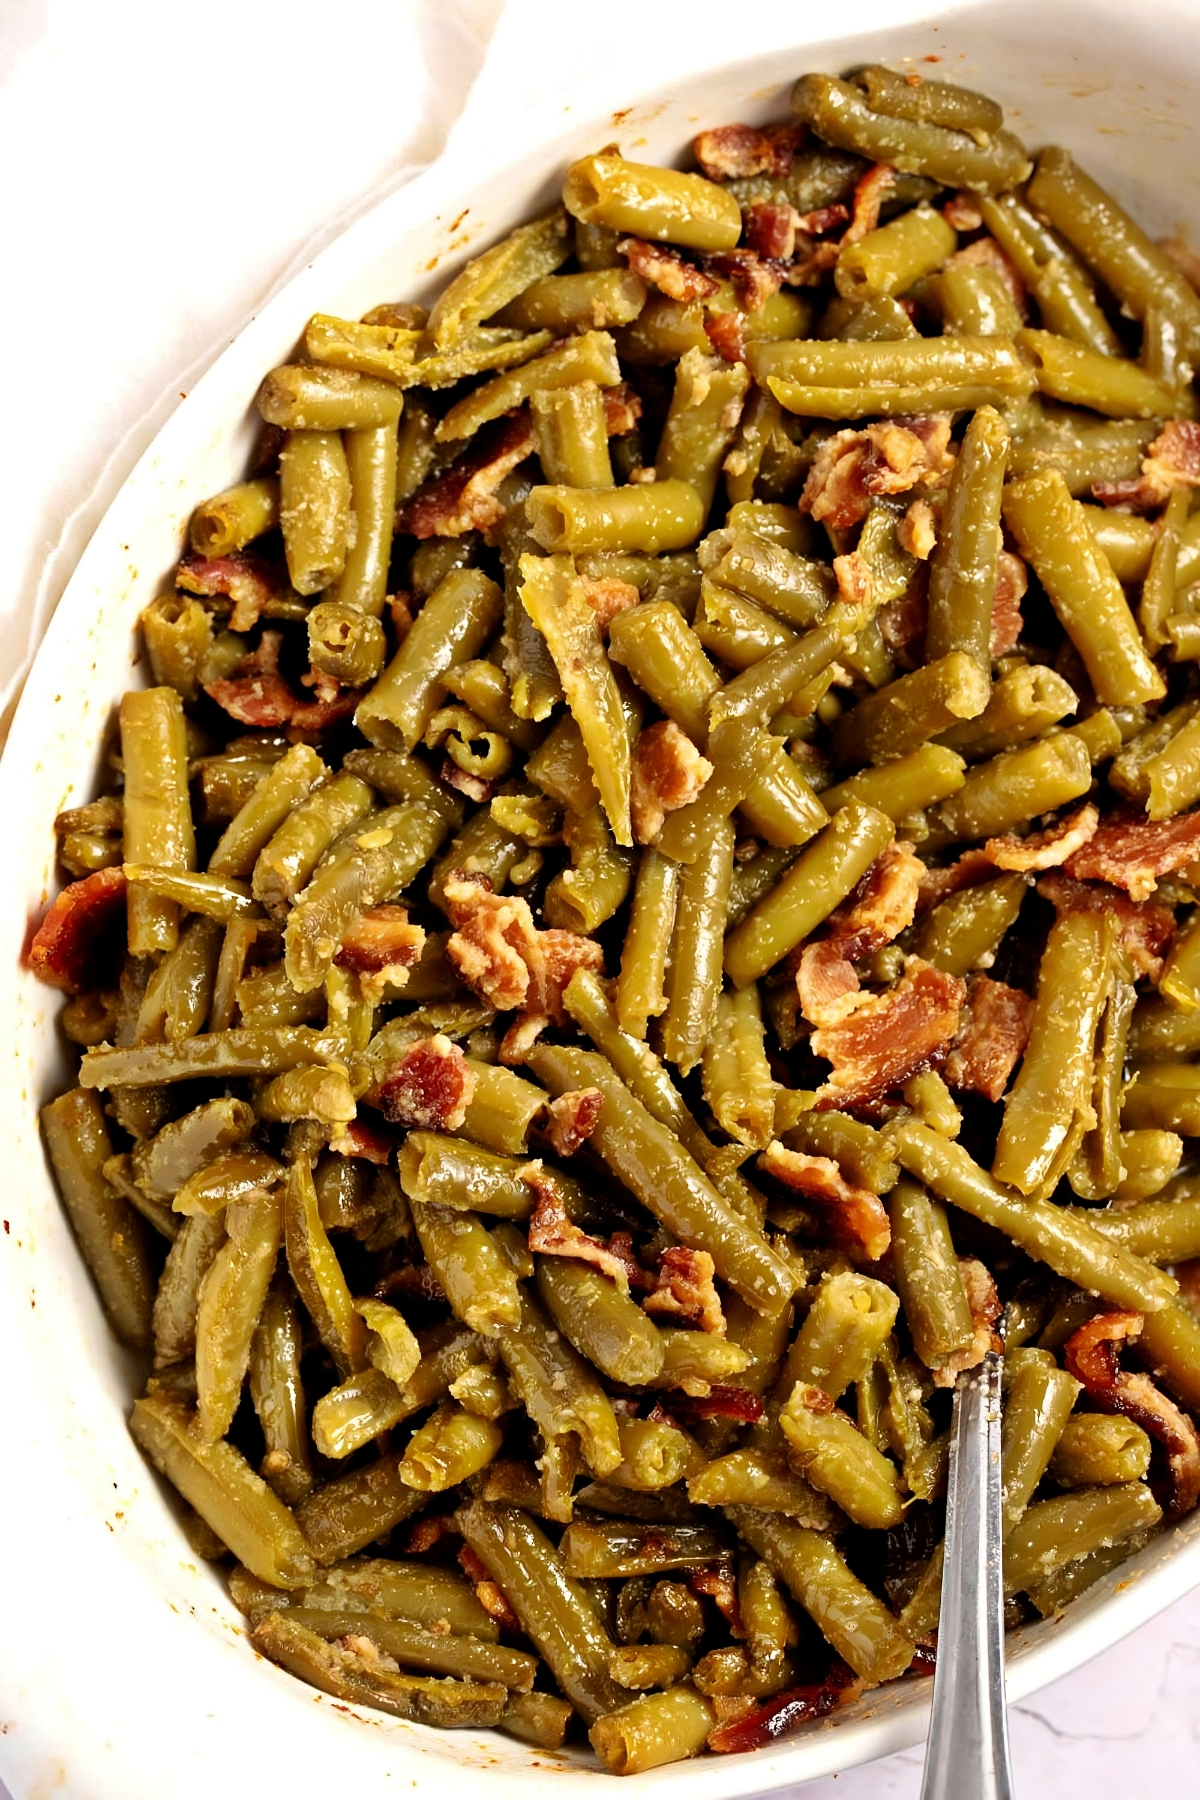 The Best Crack Green Beans (+ Easy Recipe) featuring Smoky, Savory and Earthy Crack Green Beans with Bacon, Brown Sugar, and Seasonings